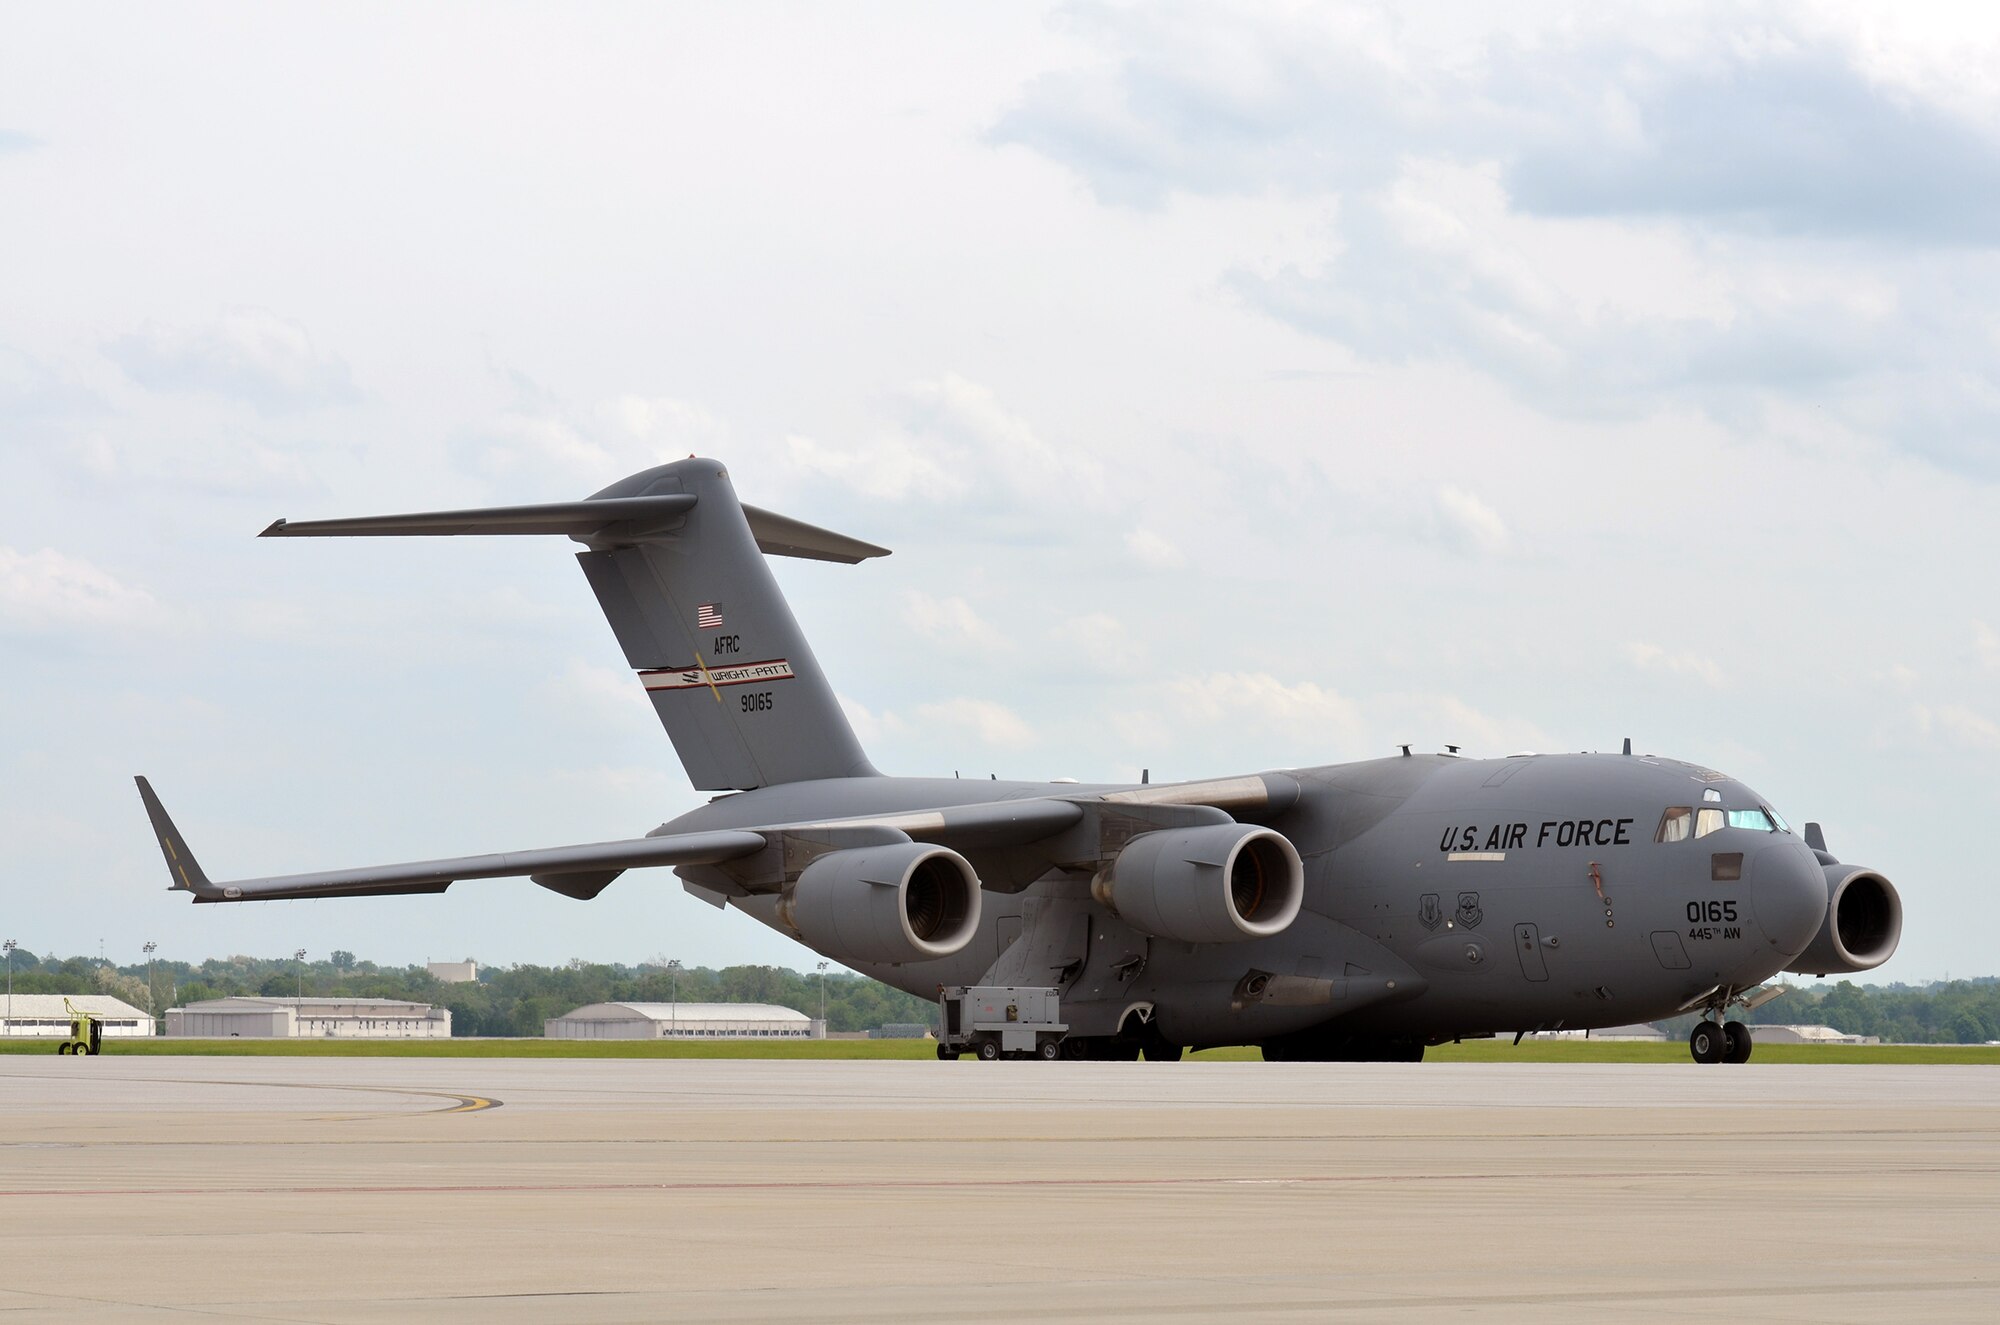 A 445th Airlift Wing C-17 Globemaster III experienced an engine malfunction causing a rare tail pipe fire Jan. 7, 2015. The wing currently has nine C-17 Globemaster III aircraft. (U.S. Air Force file photo/Staff Sgt. Mikhail Berlin)